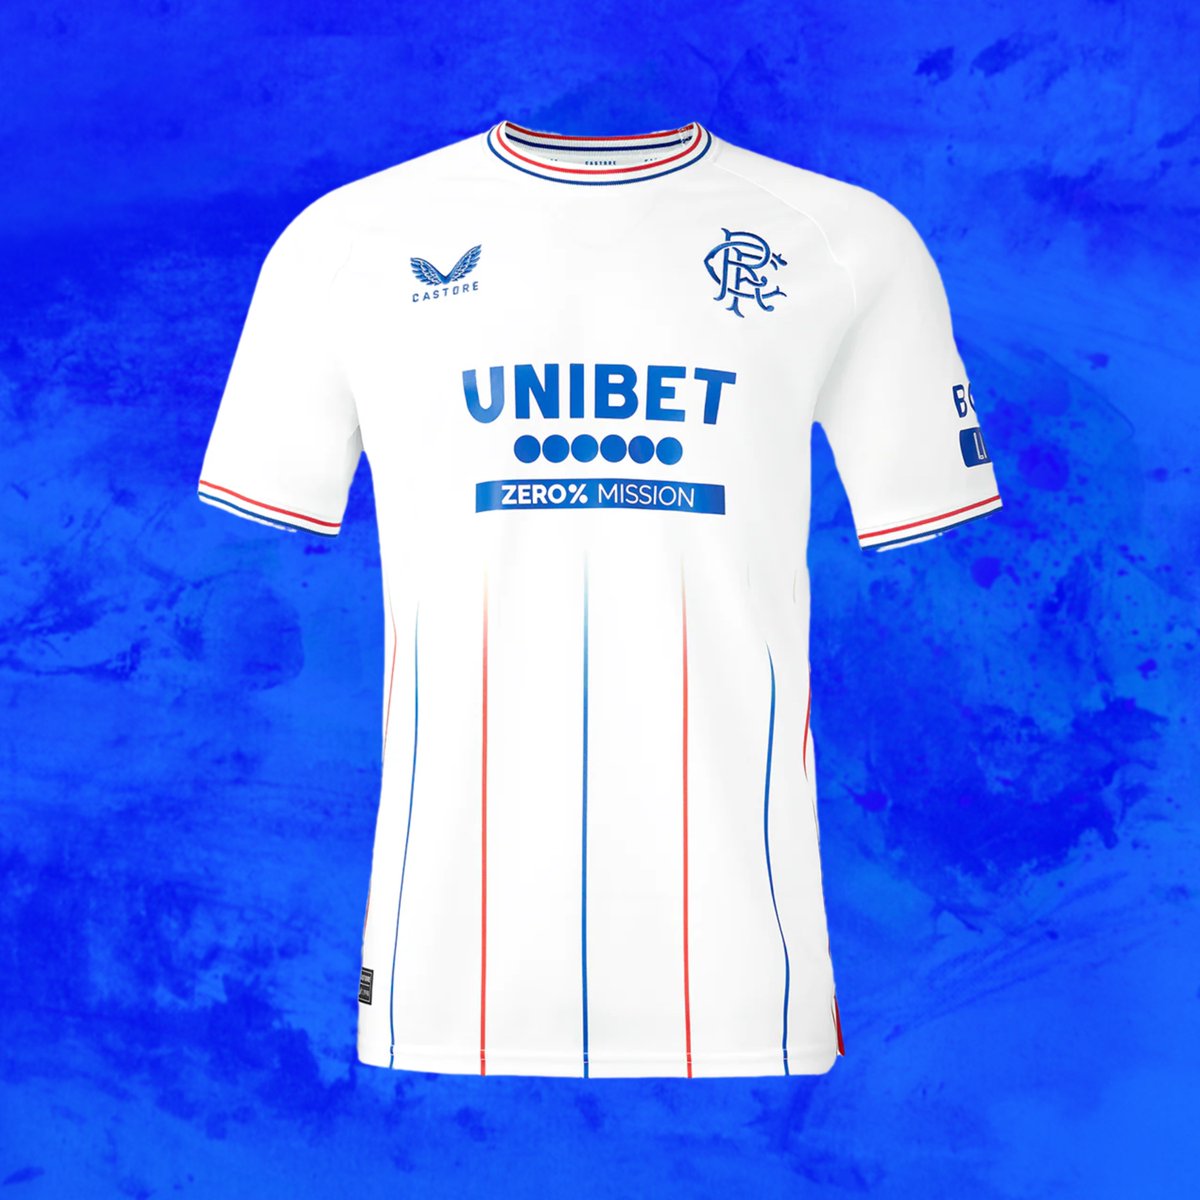 🚨 Rangers away shirt giveaway 🚨 ➡️ 𝗙𝗼𝗹𝗹𝗼𝘄 𝗮𝗻𝗱 𝗥𝗧 𝘁𝗼 𝗵𝗮𝘃𝗲 𝗮 𝗰𝗵𝗮𝗻𝗰𝗲 𝘁𝗼 𝘄𝗶𝗻 @JoshuaBarrieRR will contact the winner via DM Drawn on Friday 📅